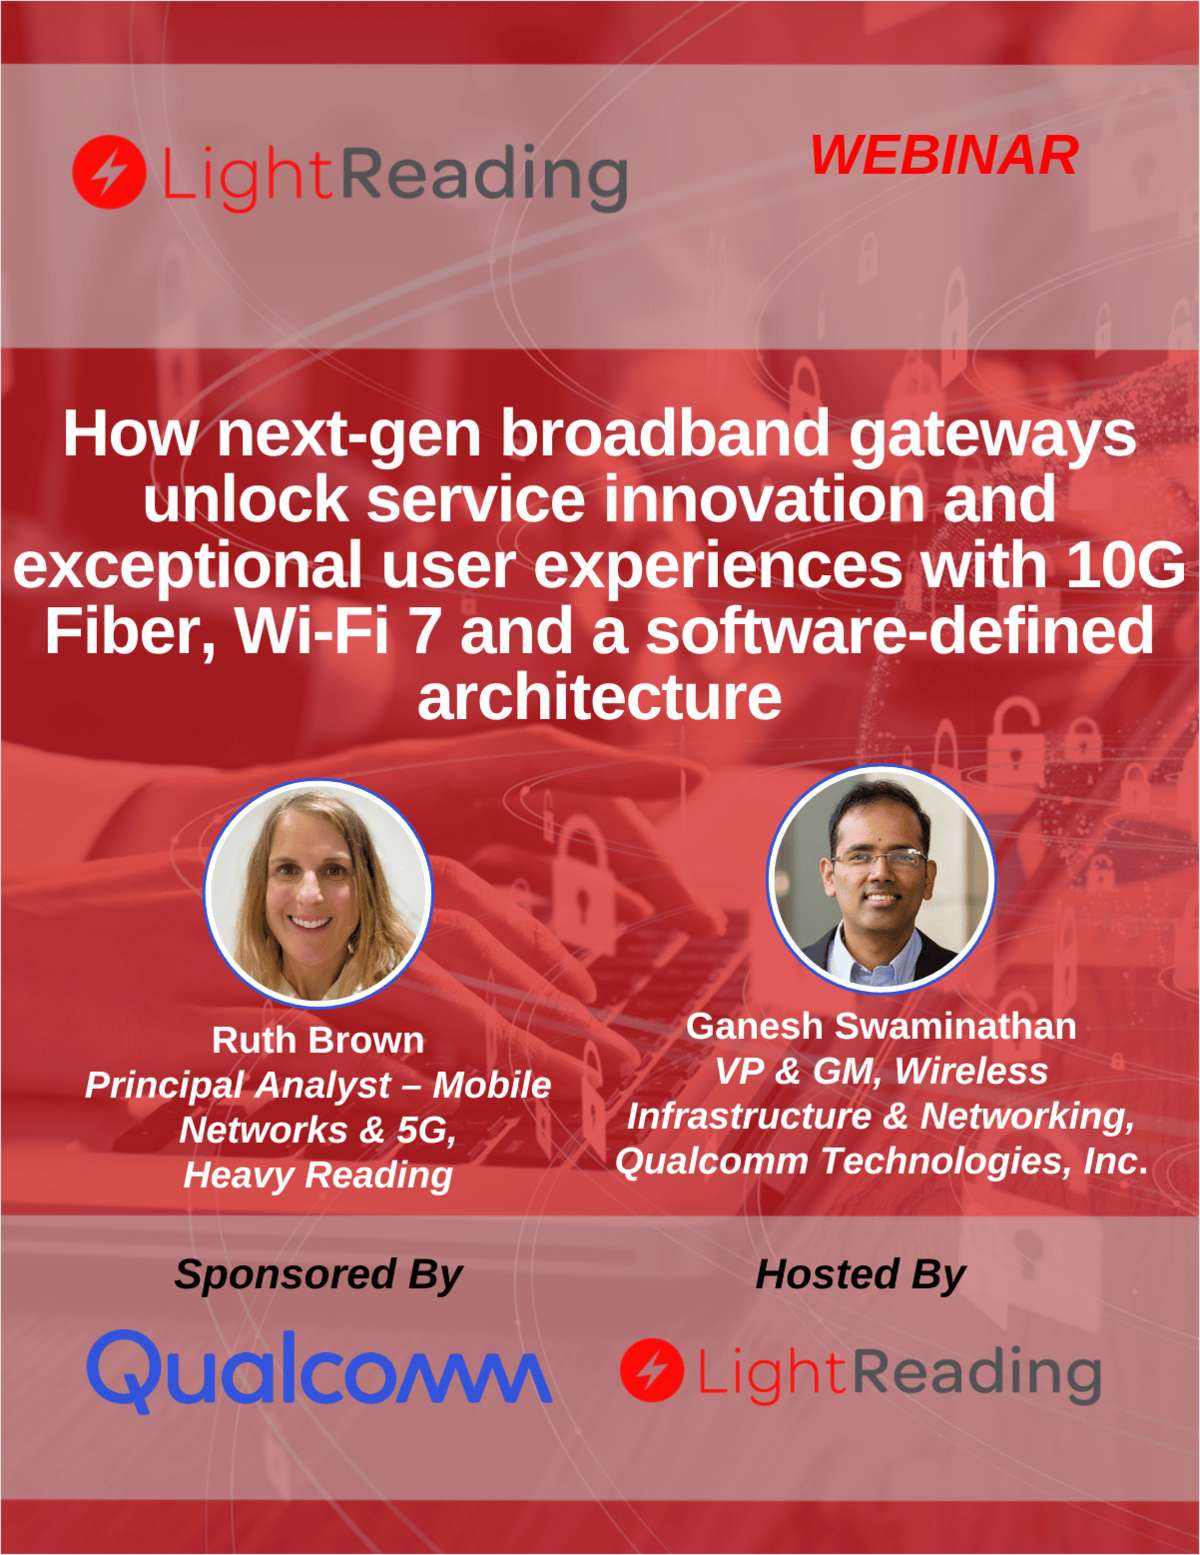 How next-gen broadband gateways unlock service innovation and exceptional user experiences with 10G Fiber, Wi-Fi 7 and a software-defined architecture